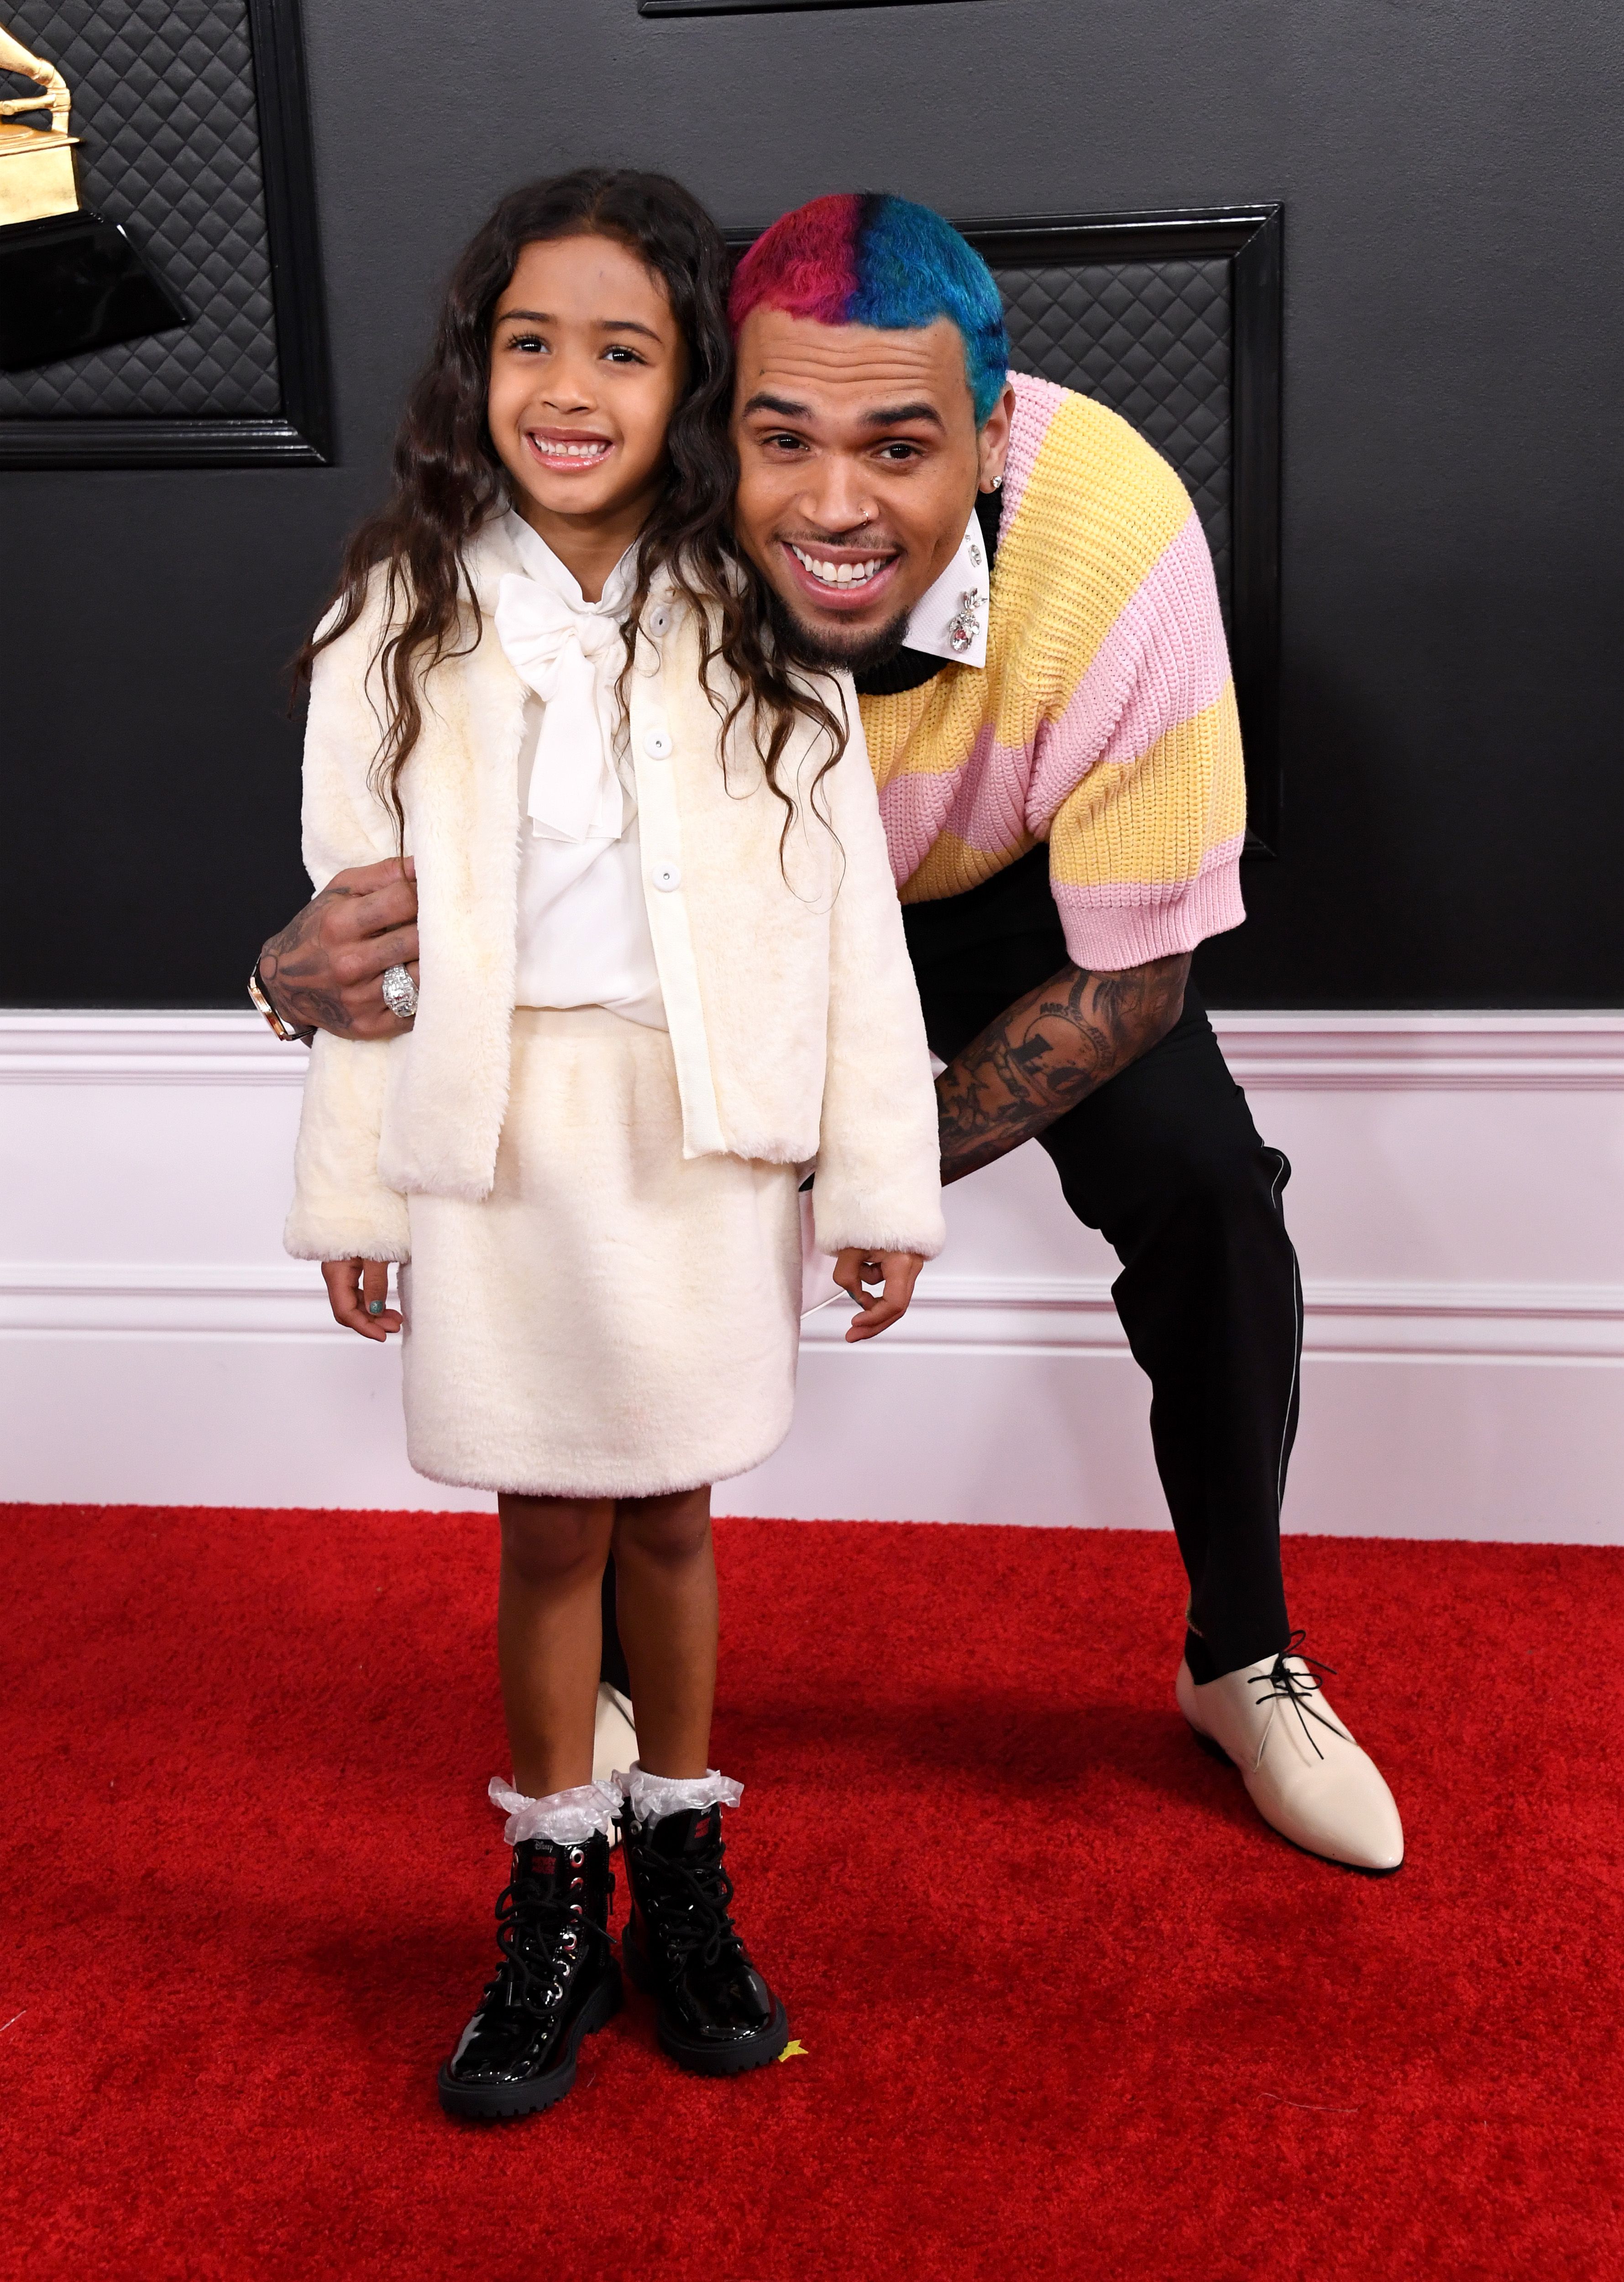 Chris Brown and Royalty Brown during the 62nd Annual Grammy Awards at Staples Center on January 26, 2020. | Photo: Getty Images